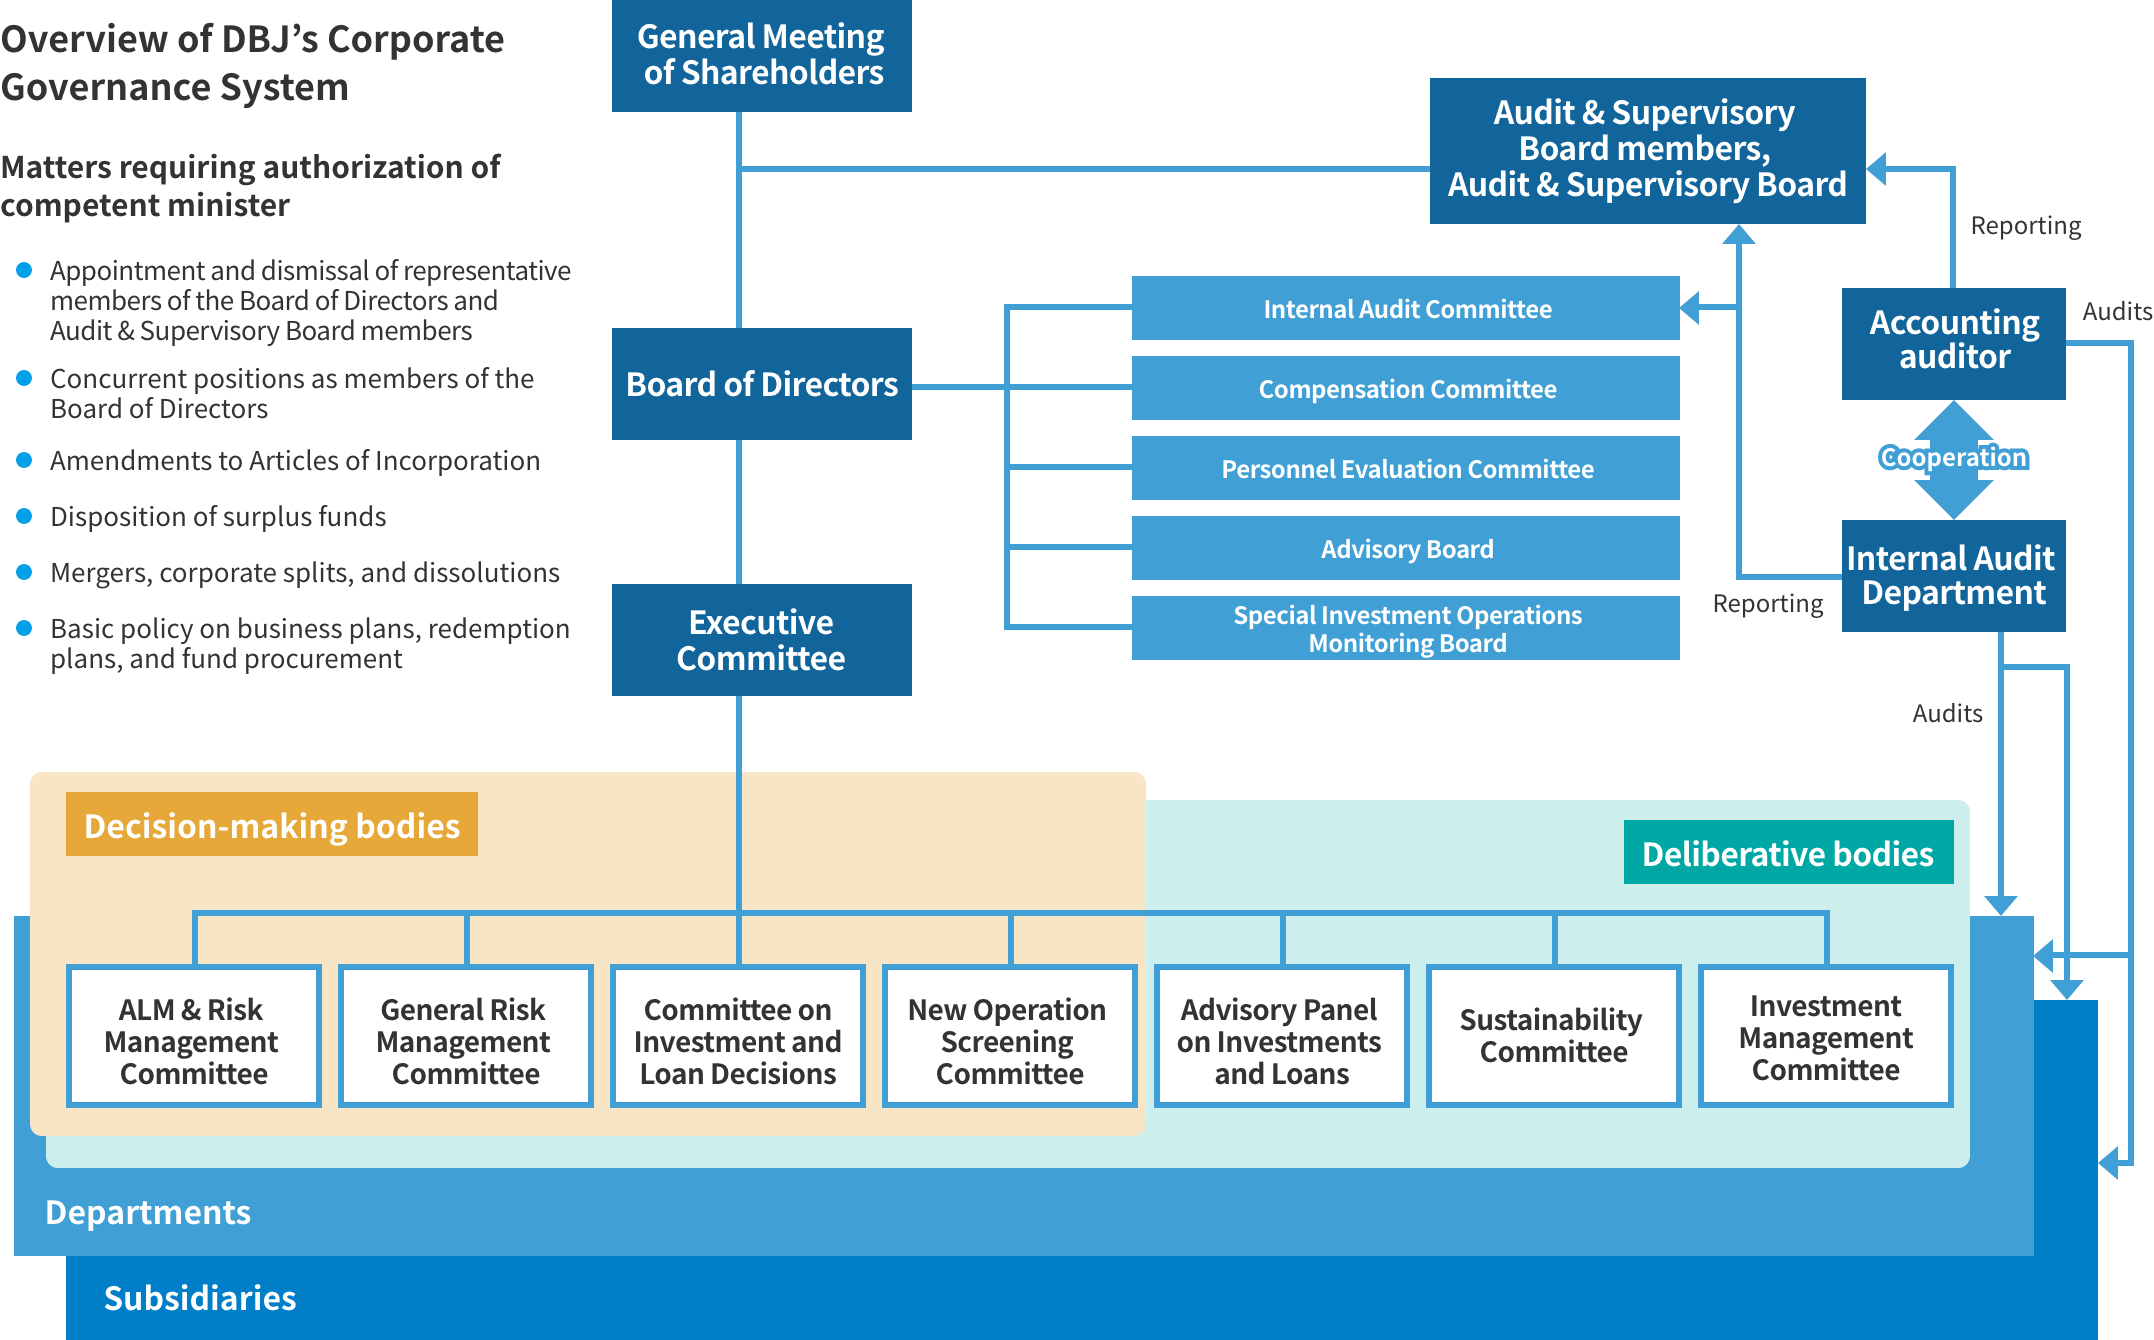 Overview of DBJ's Corporate Governance System